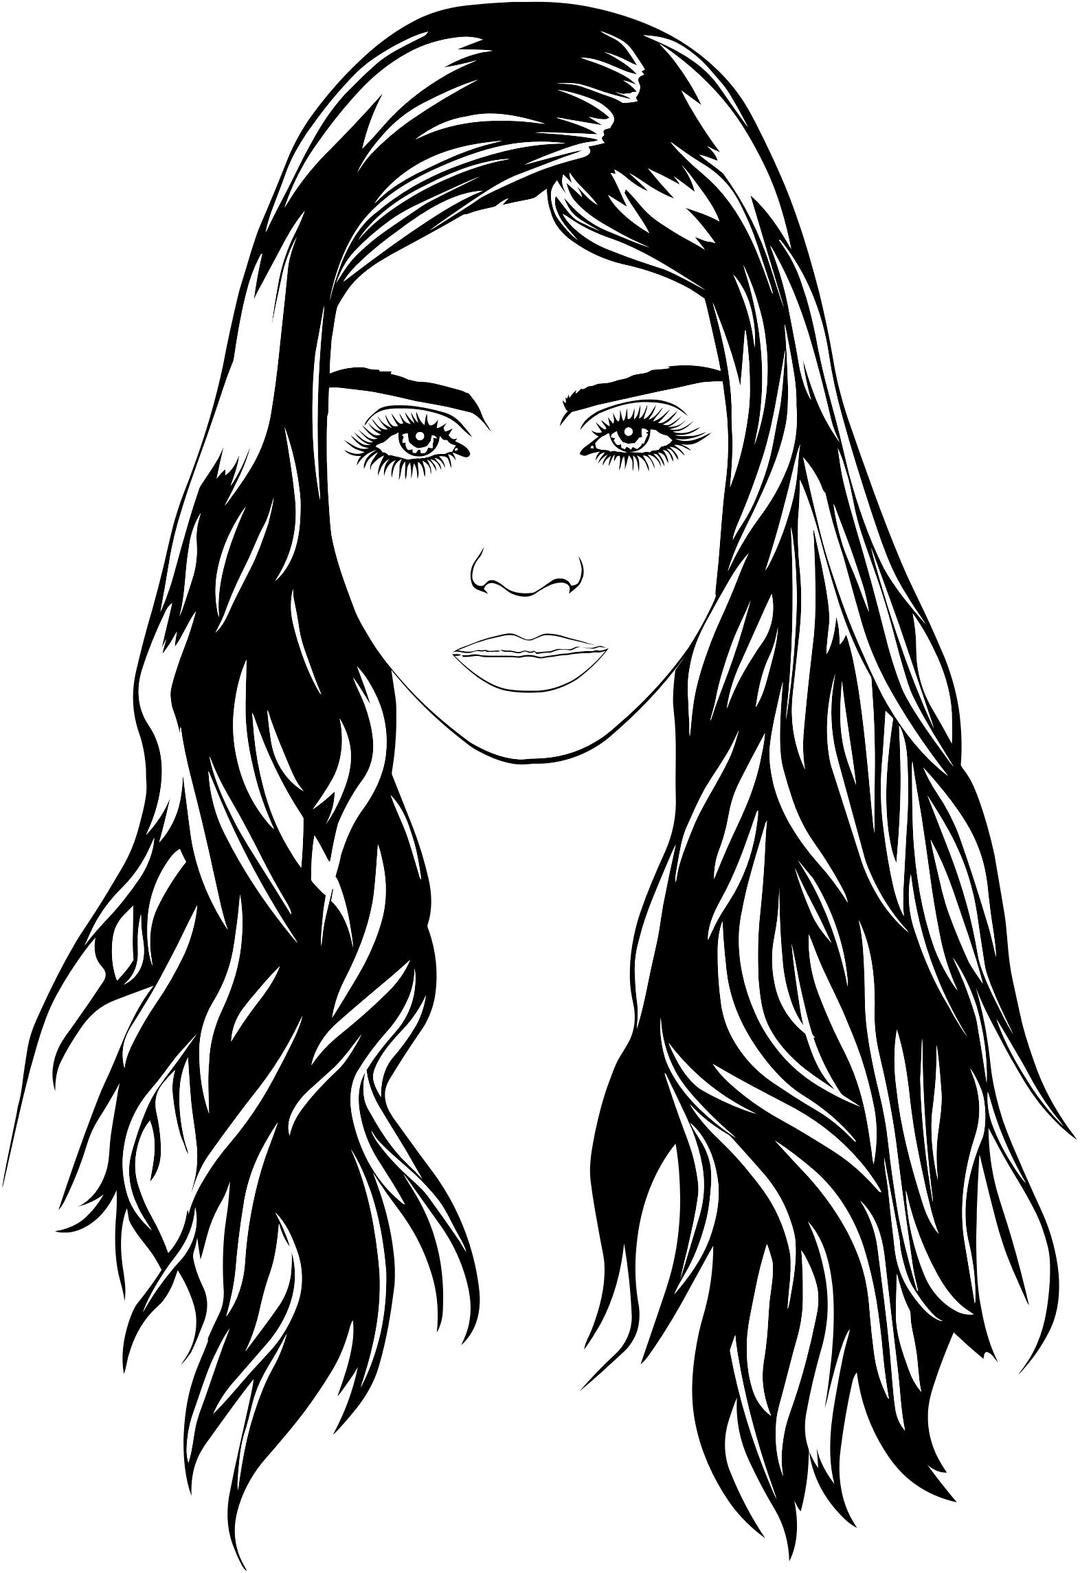 Woman With Cold Stare Line Art png transparent